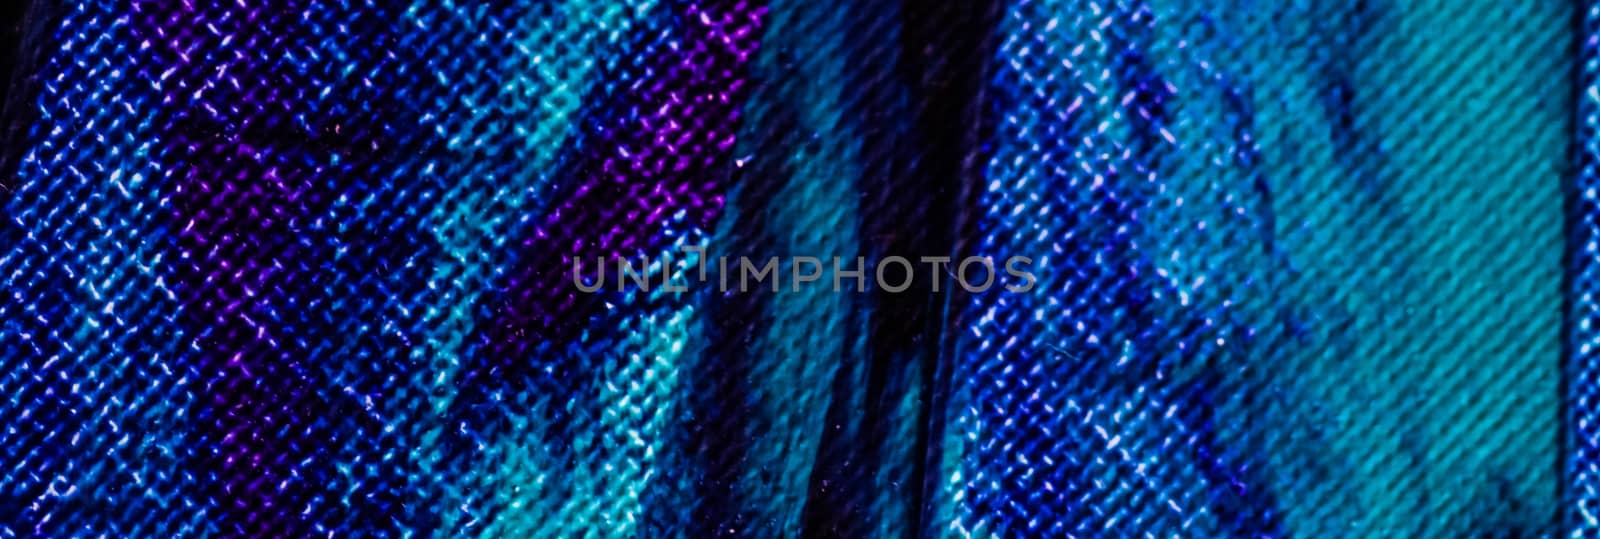 Mix of blue, turquoise and purple abstract background, painting and art by Anneleven